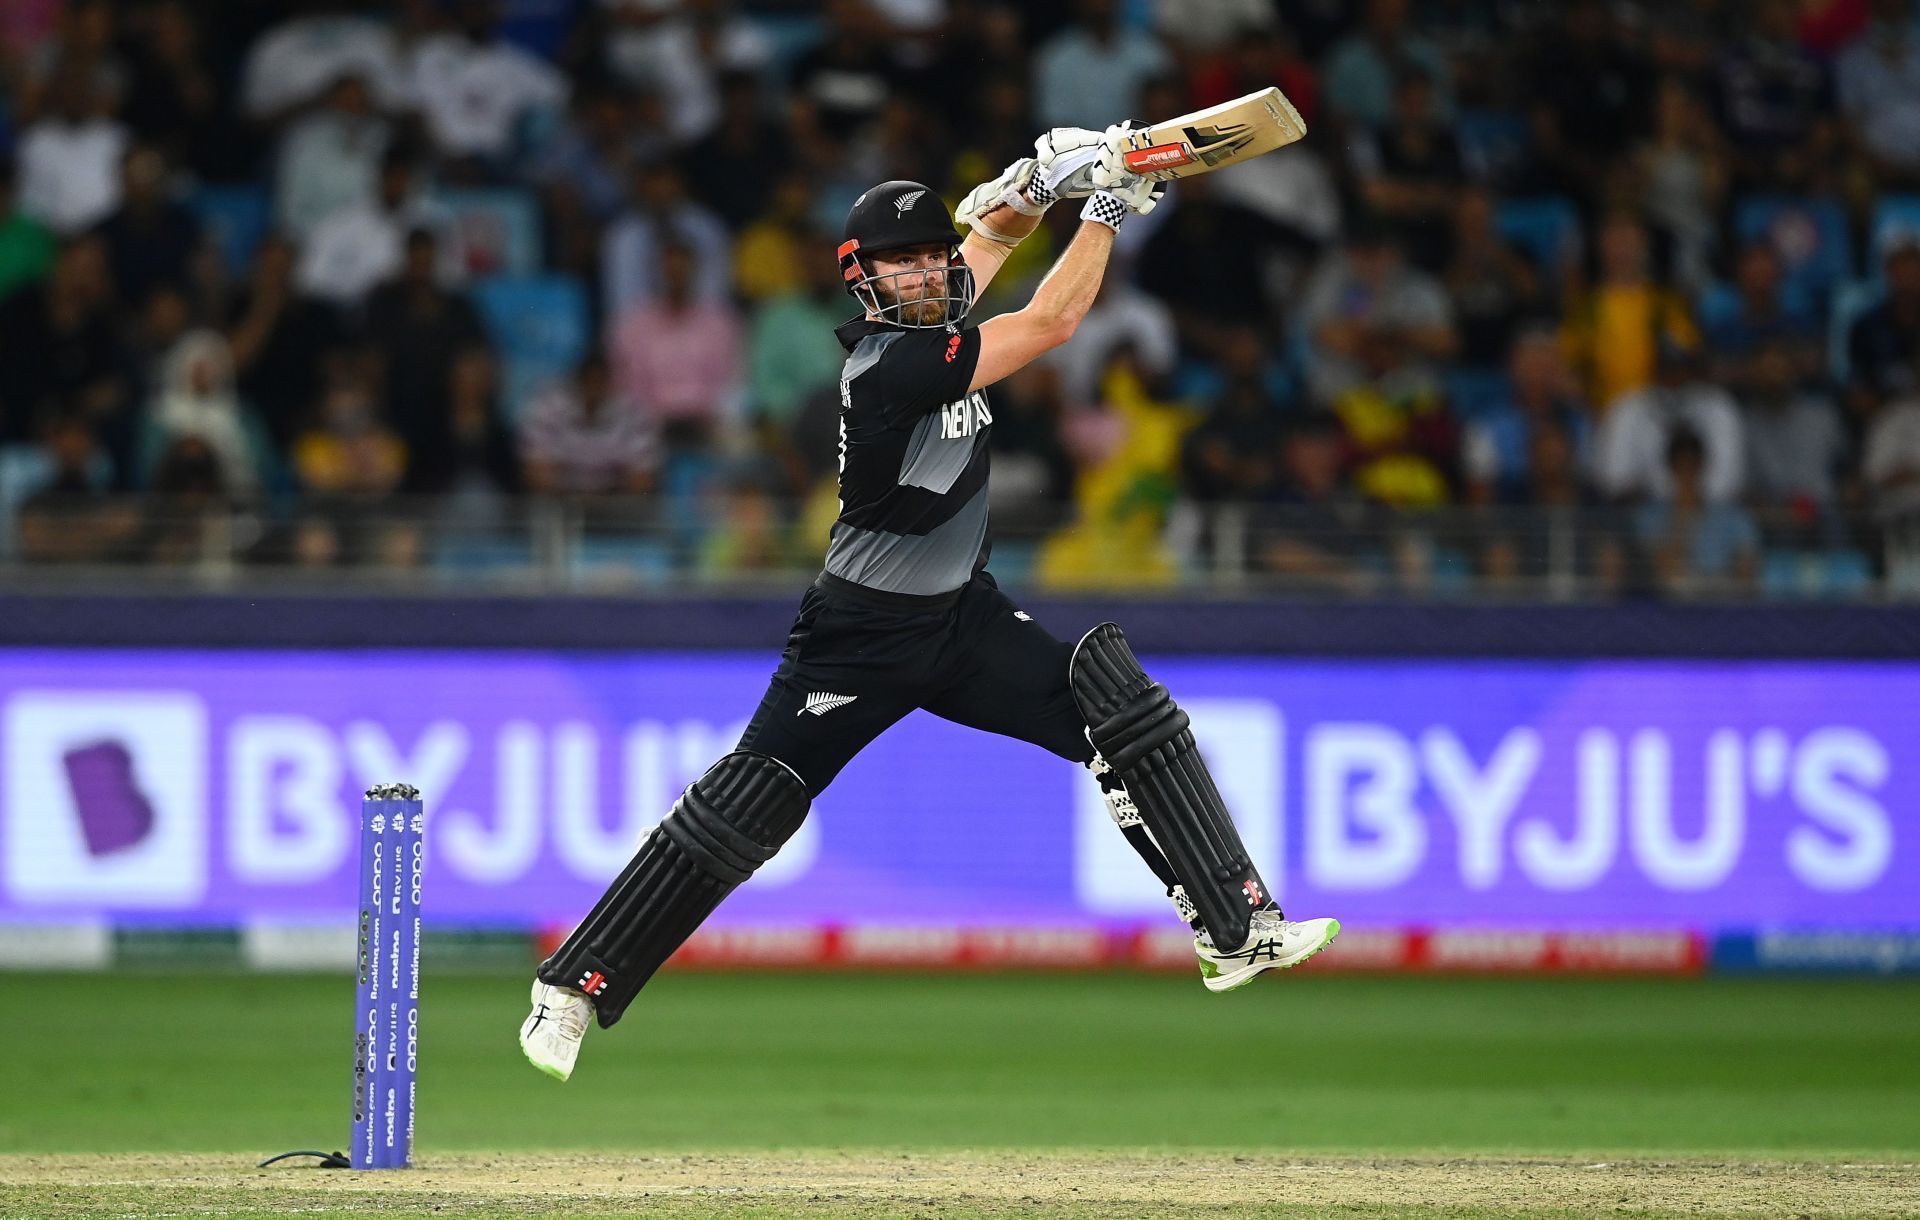 Williamson tore into Starc at the T20 World Cup final